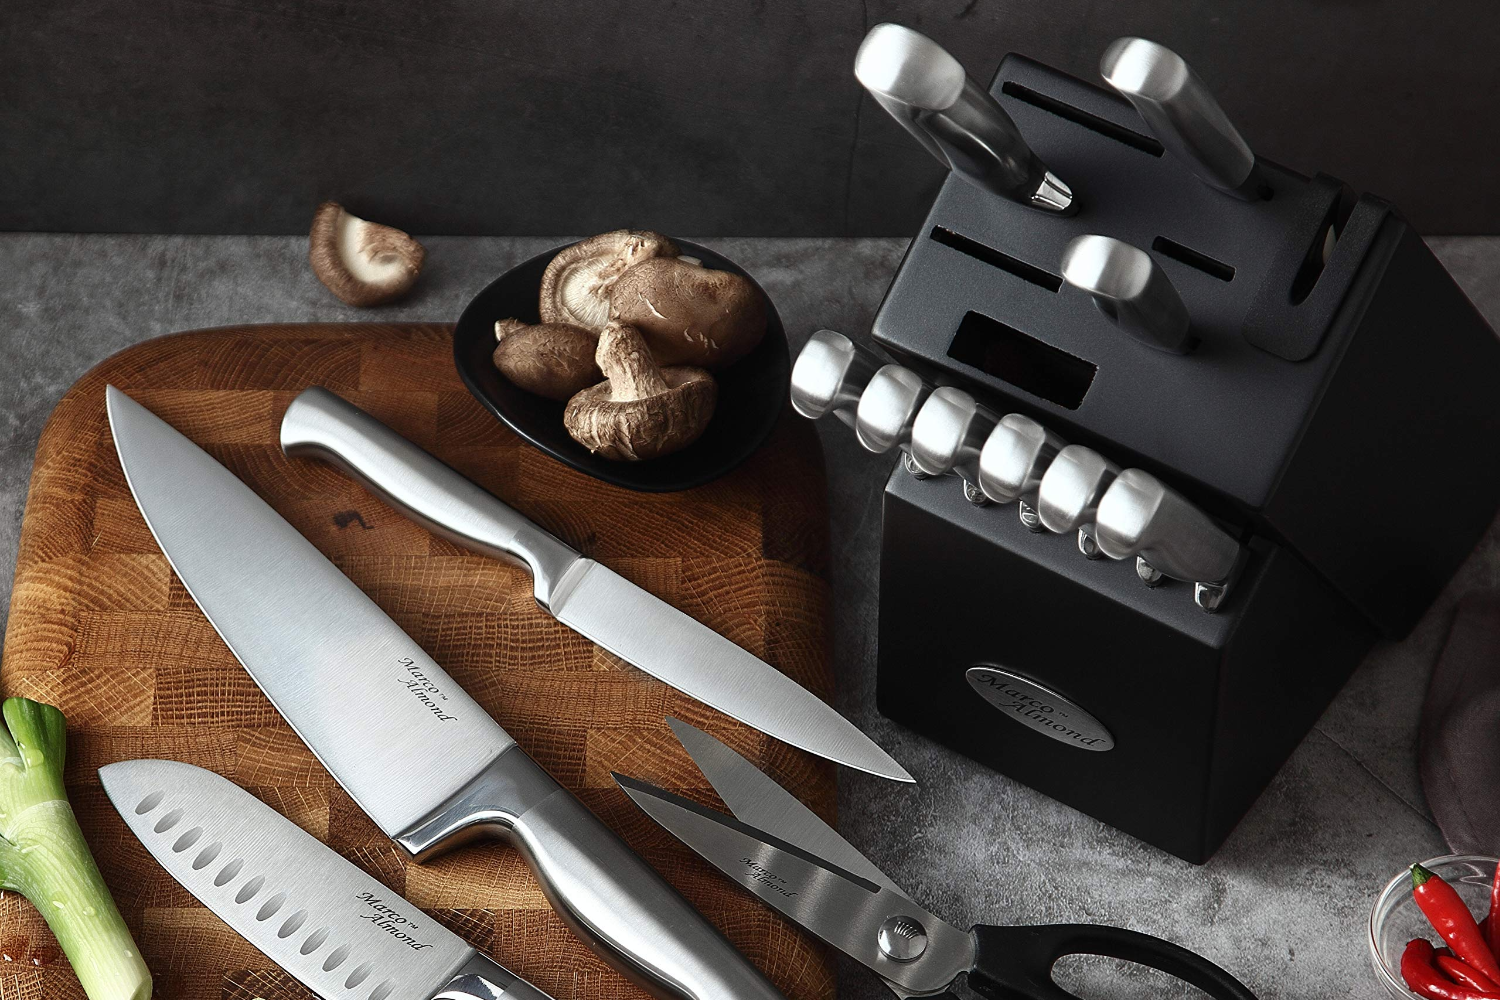 Marco Almond Knife Set with Block